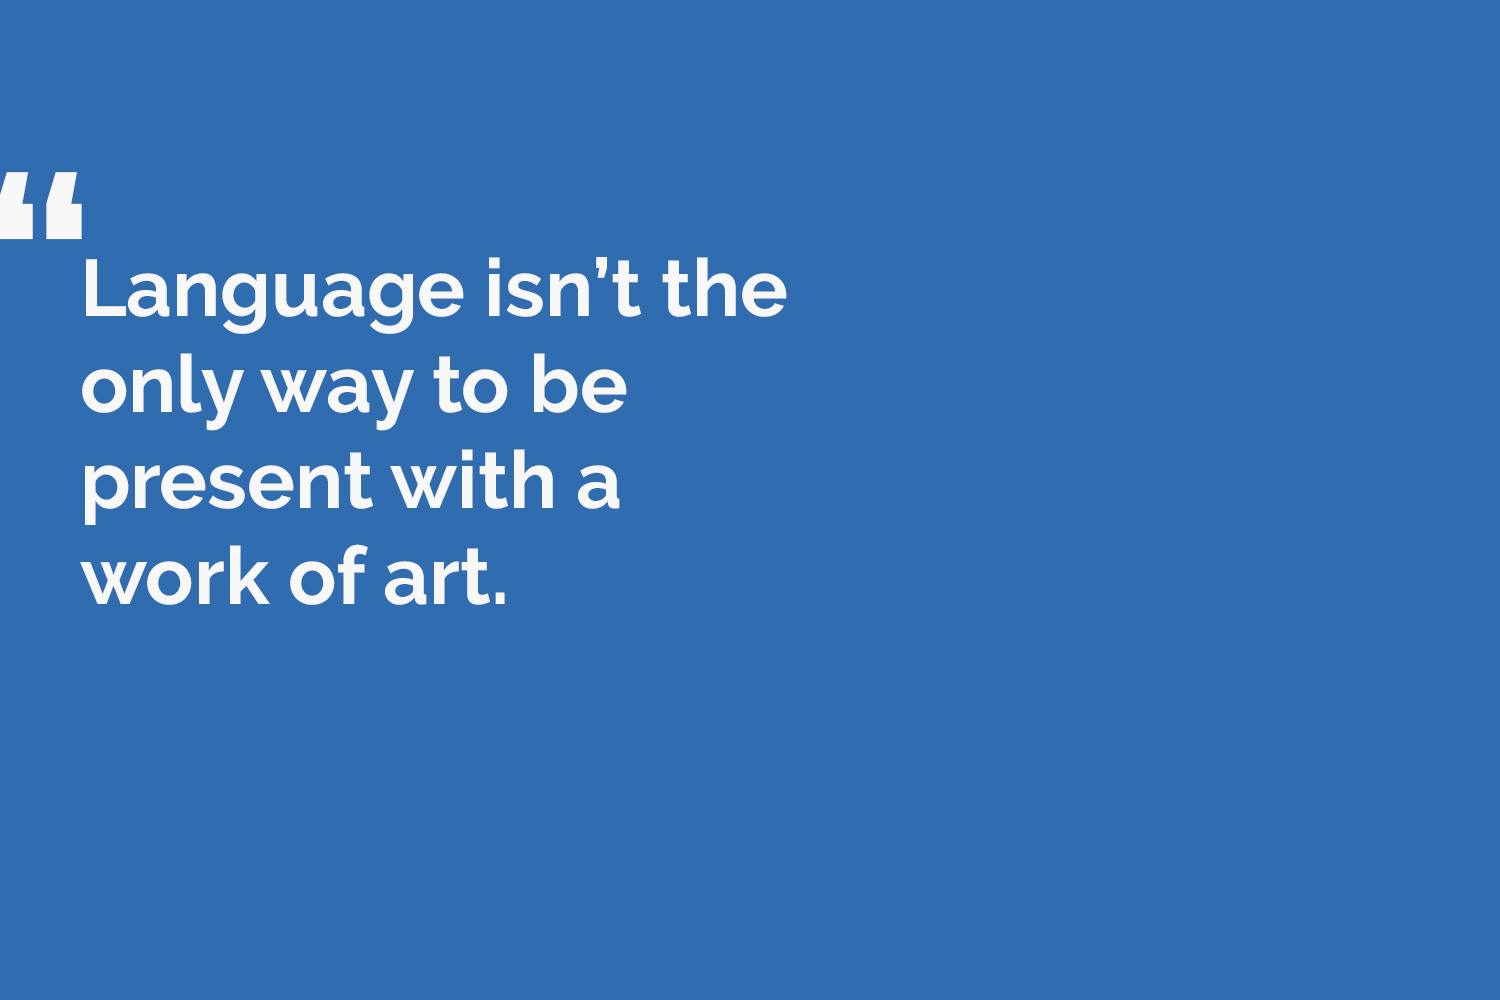 quote card reads: Language isn't the only way to be present with a work of art.